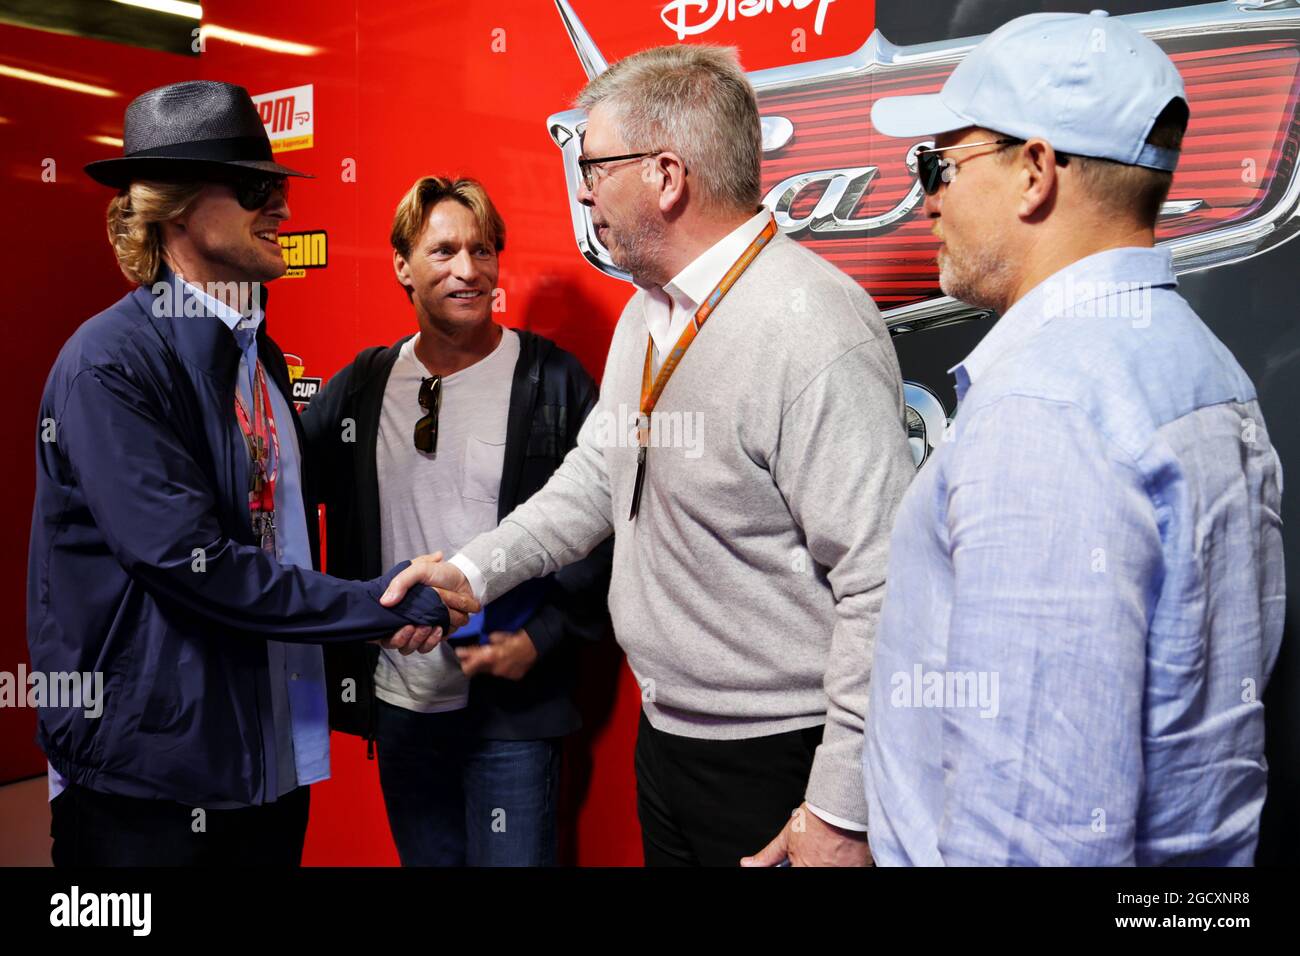 Owen Wilson (USA) Actor (Left), Ross Brawn (GBR) Managing Director, Motor Sports, (Centre), and Woody Harrelson (USA) Actor (Right). British Grand Prix, Sunday 16th July 2017. Silverstone, England. Stock Photo